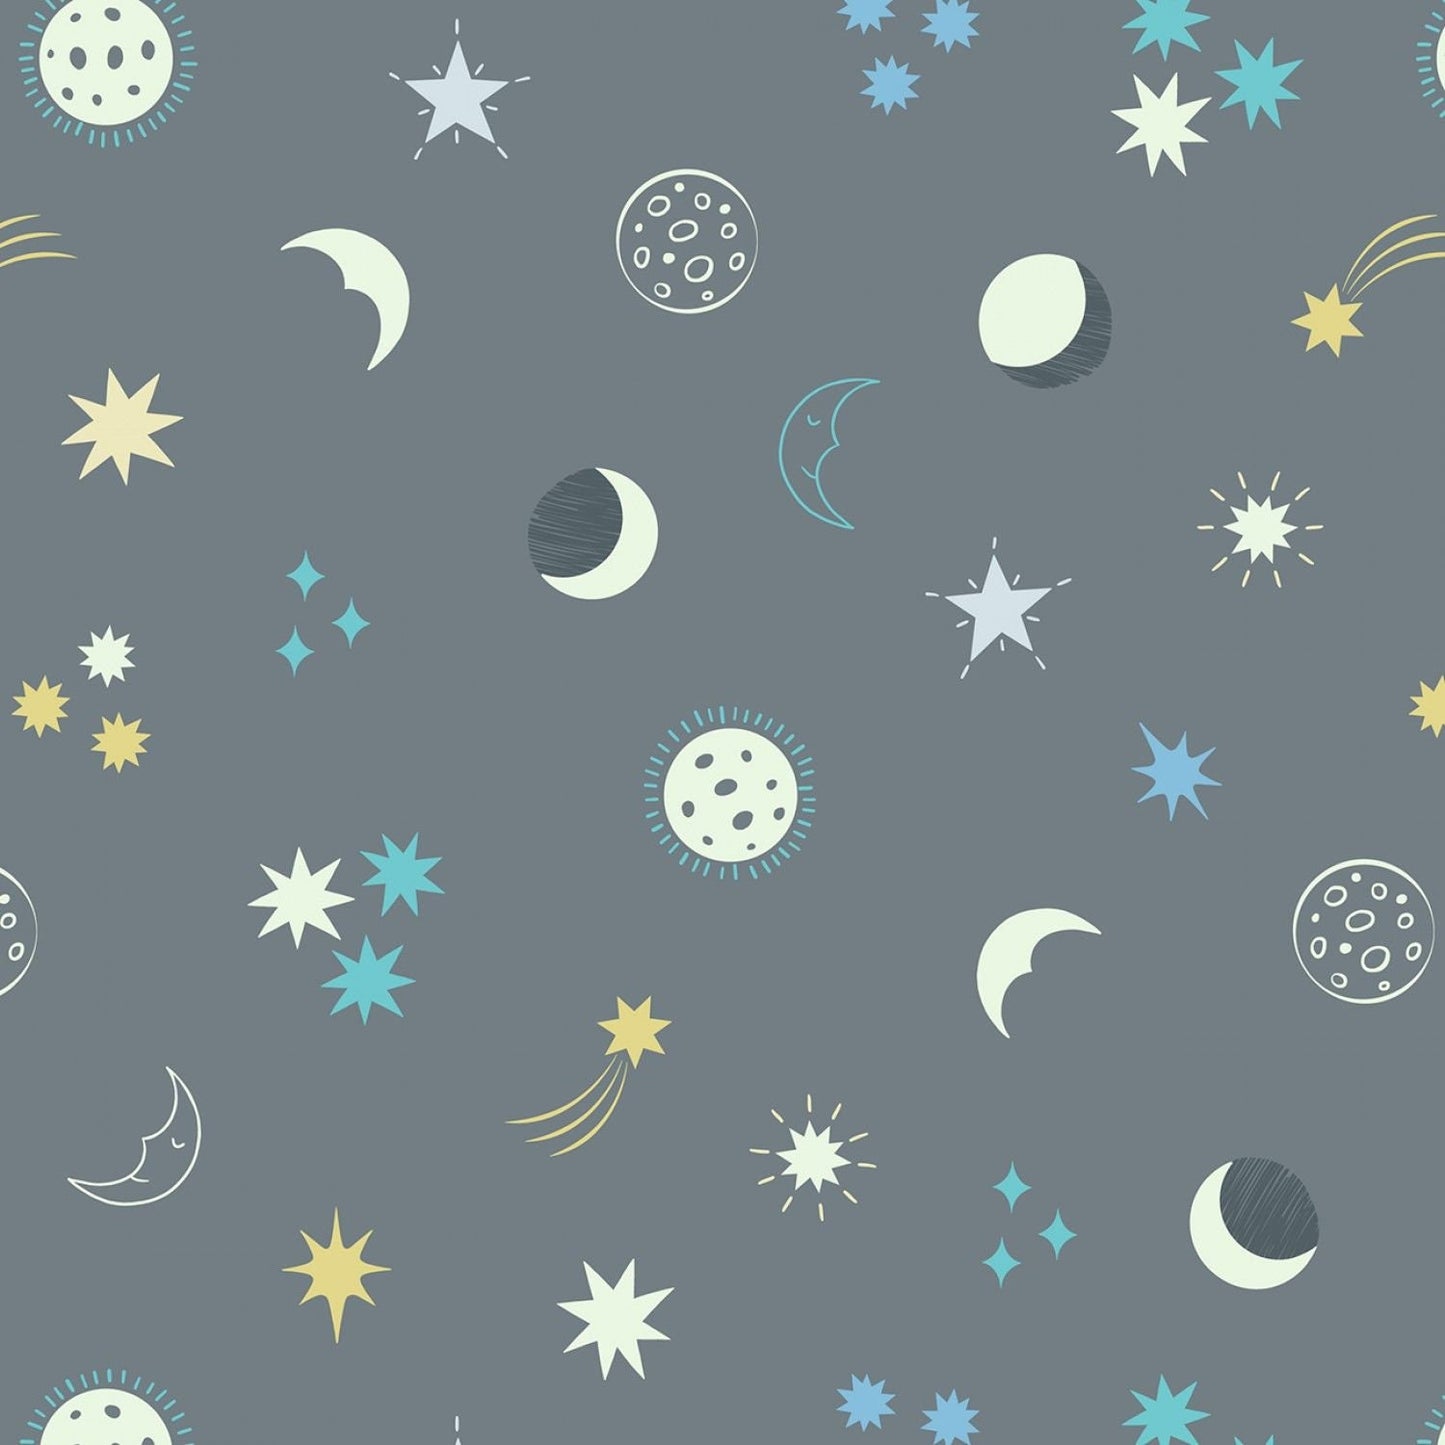 Small Things Glow Night Sky on Grey SM38-2 Glow in the Dark Cotton Woven Fabric